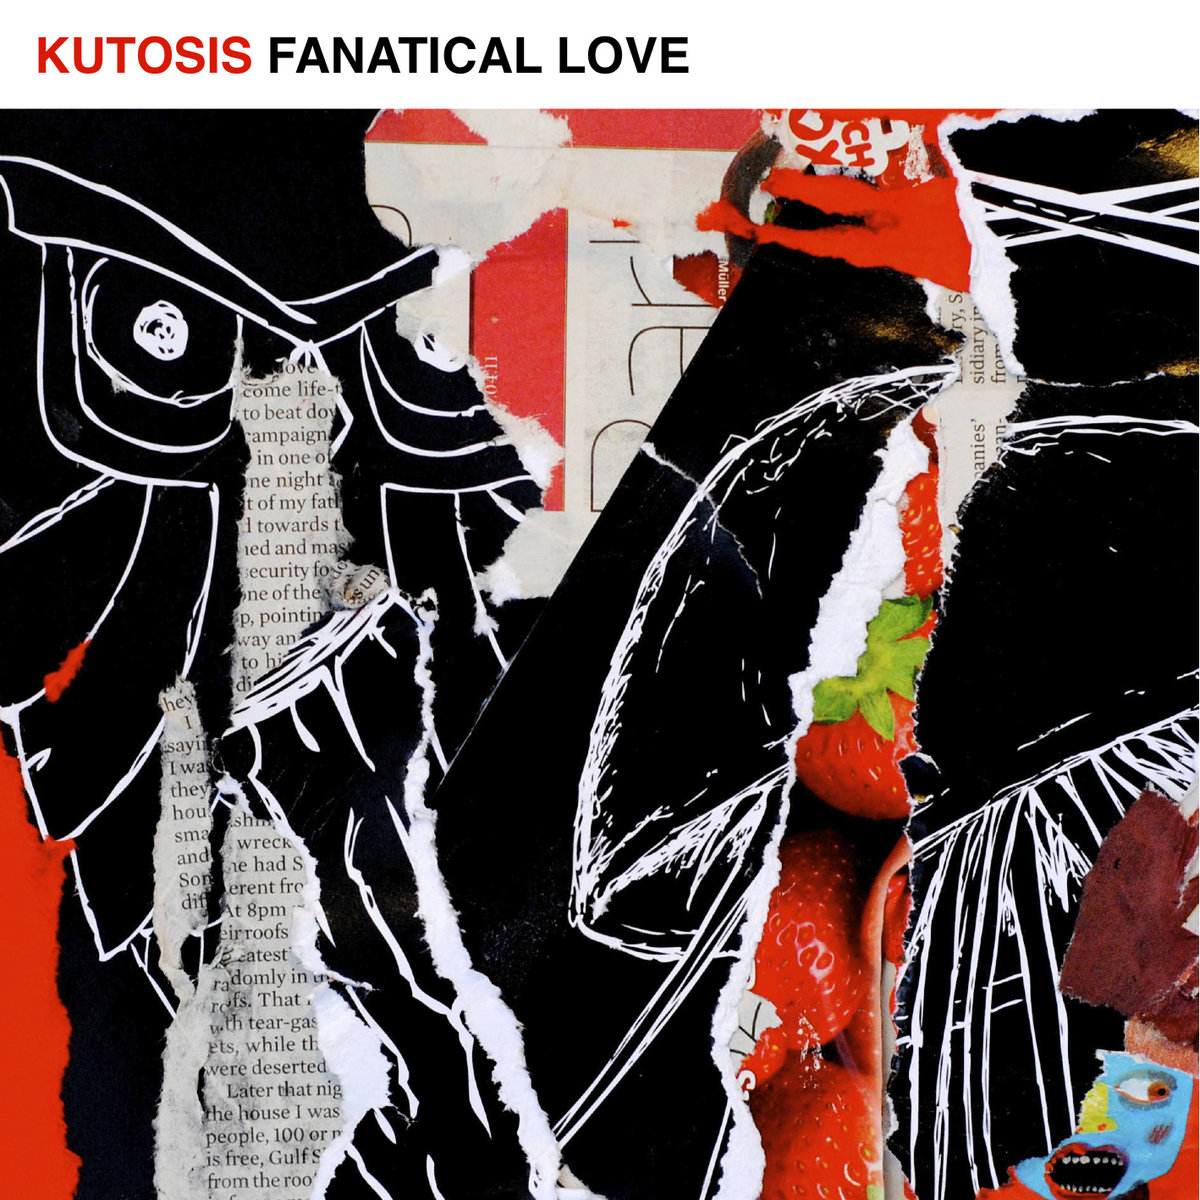 Kutosis: the three faces of Fanatical Love